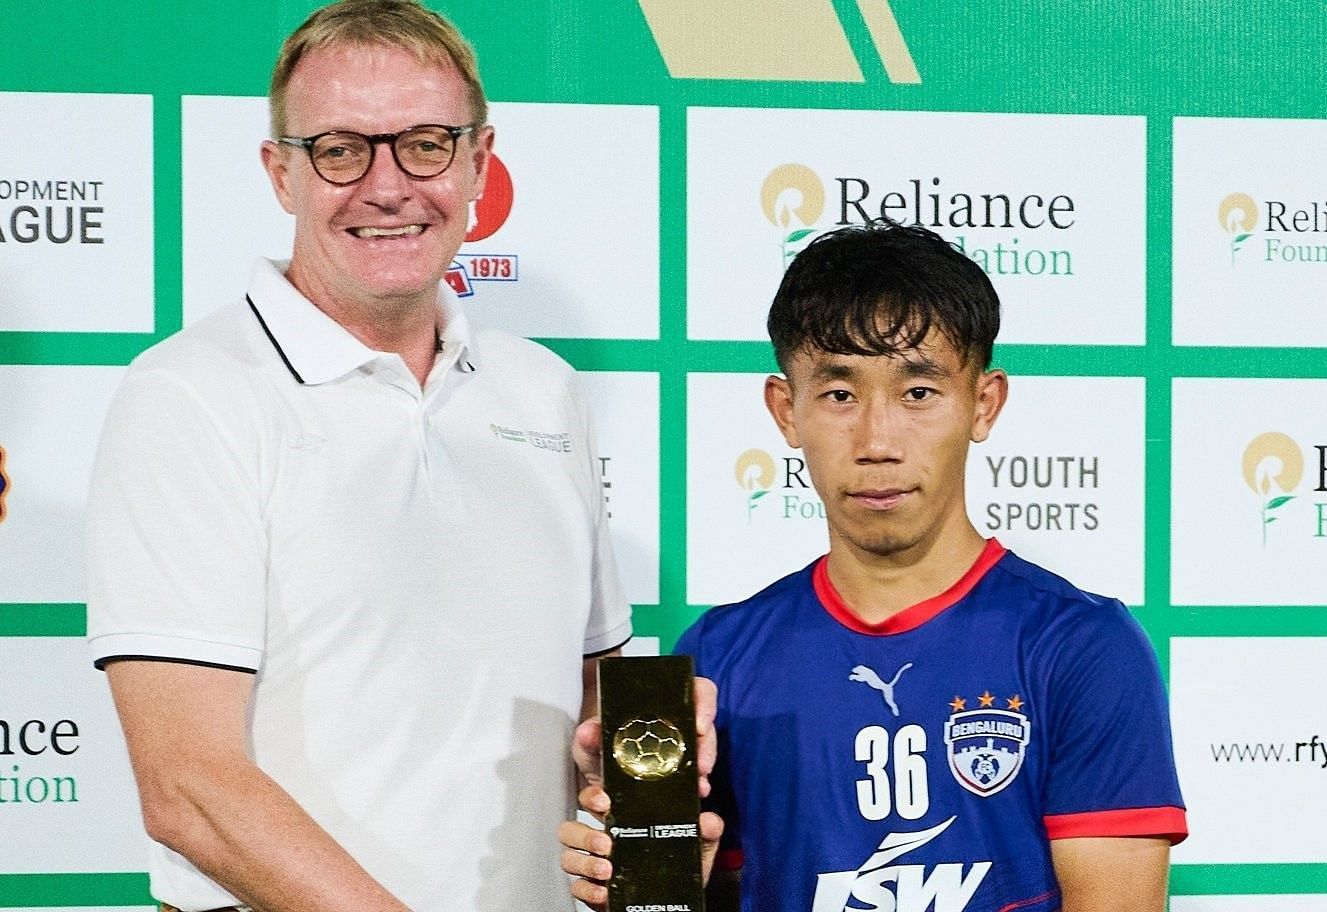 Thoi Singh scored 9 goals and assisted 4 times during the RFDL season.